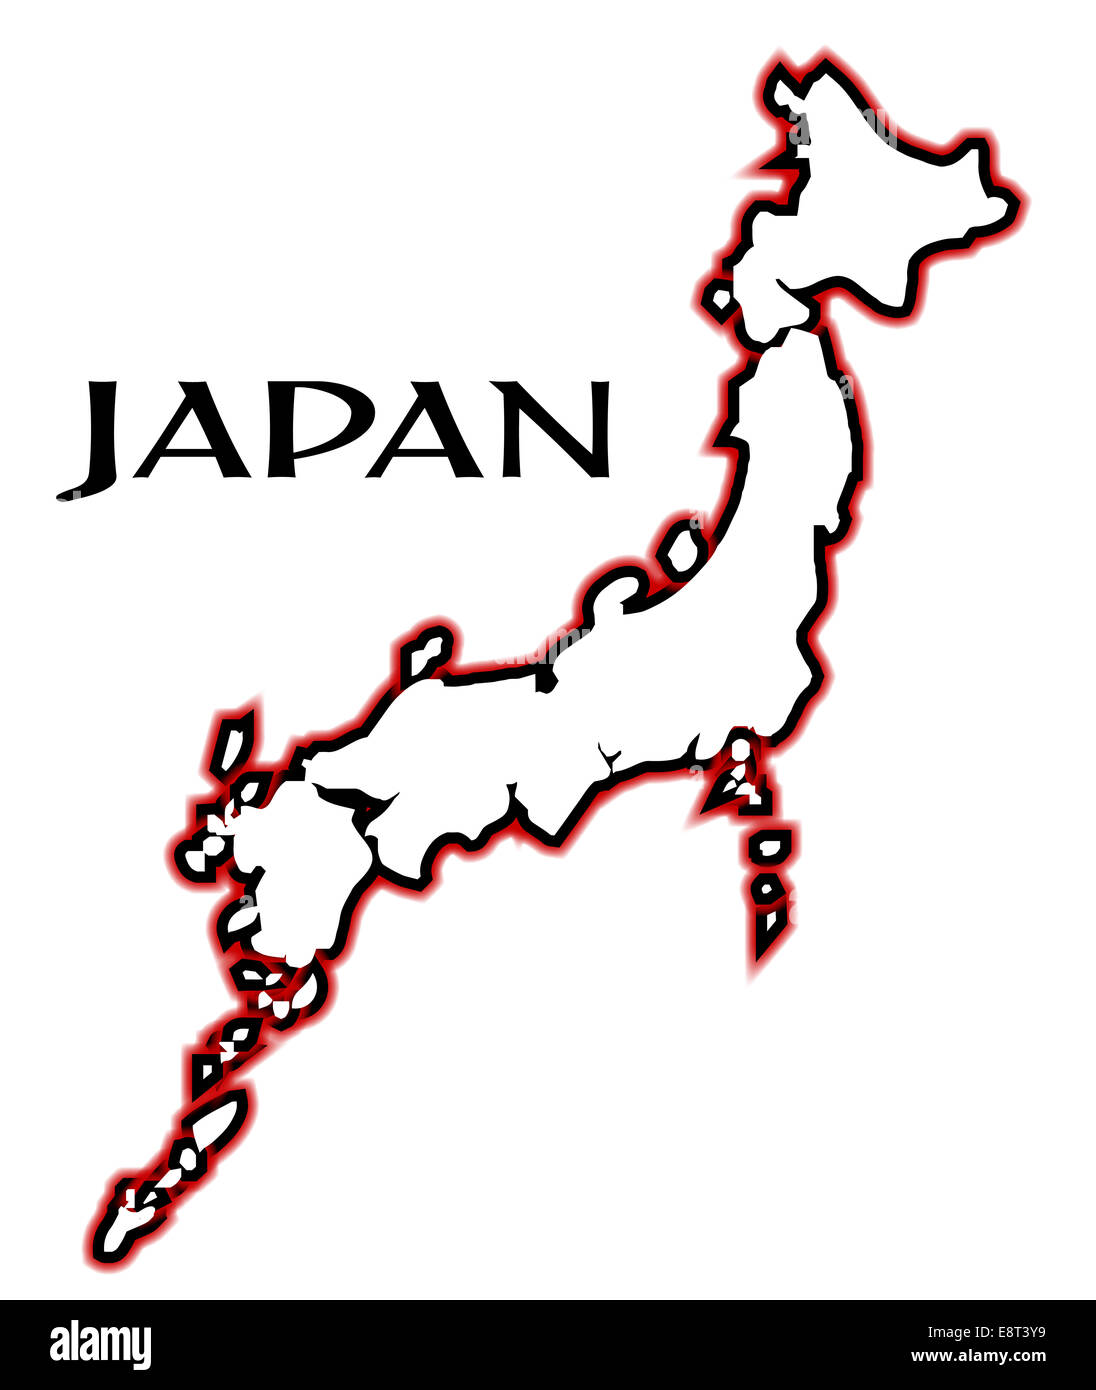 Outline map of Japan isolated over a white background Stock Photo: 74288685 - Alamy